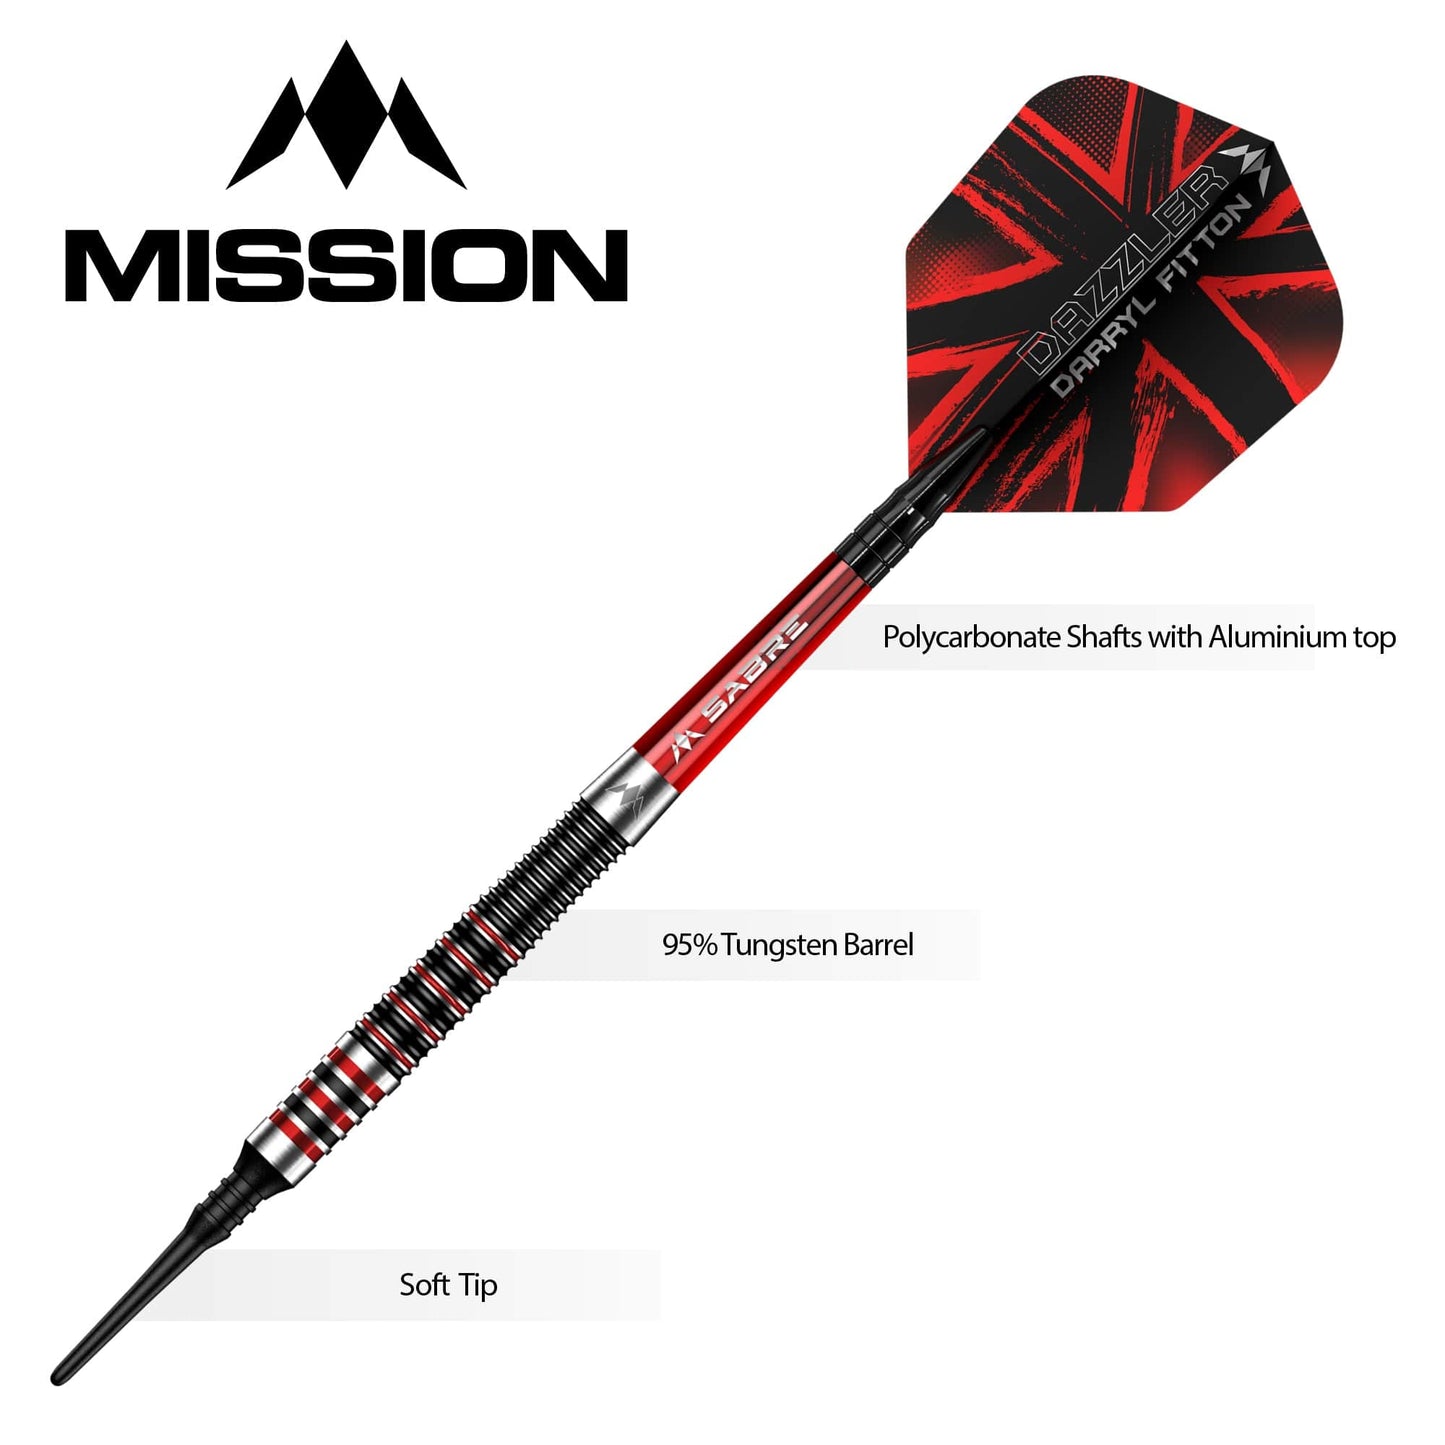 Mission Darryl Fitton Darts - Soft Tip - Electro Black & Red - The Dazzler - 18g 18g